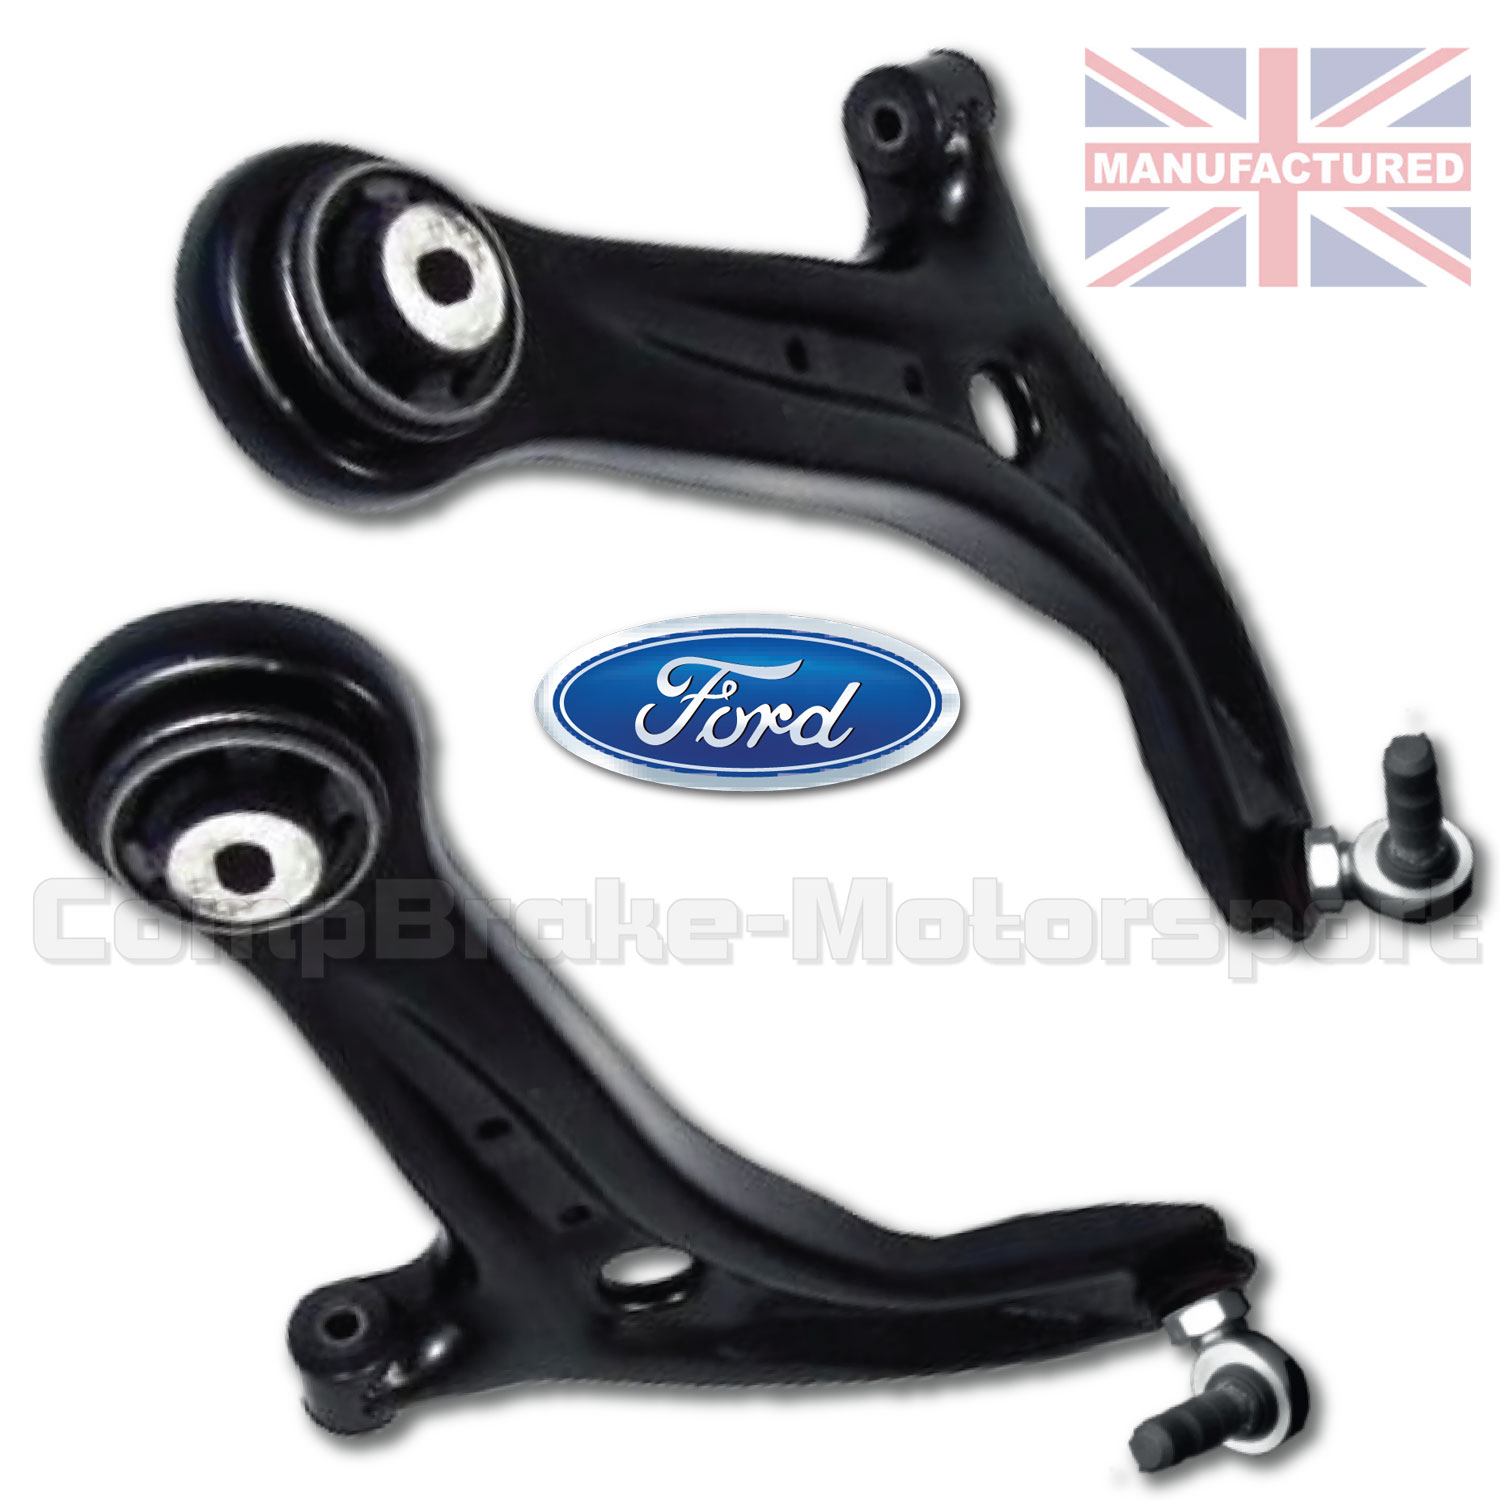 FOR FORD FIESTA MK7 08>16 FRONT 2 SUSPENSION WISHBONE ARMS BALL JOINTS LH & RH 